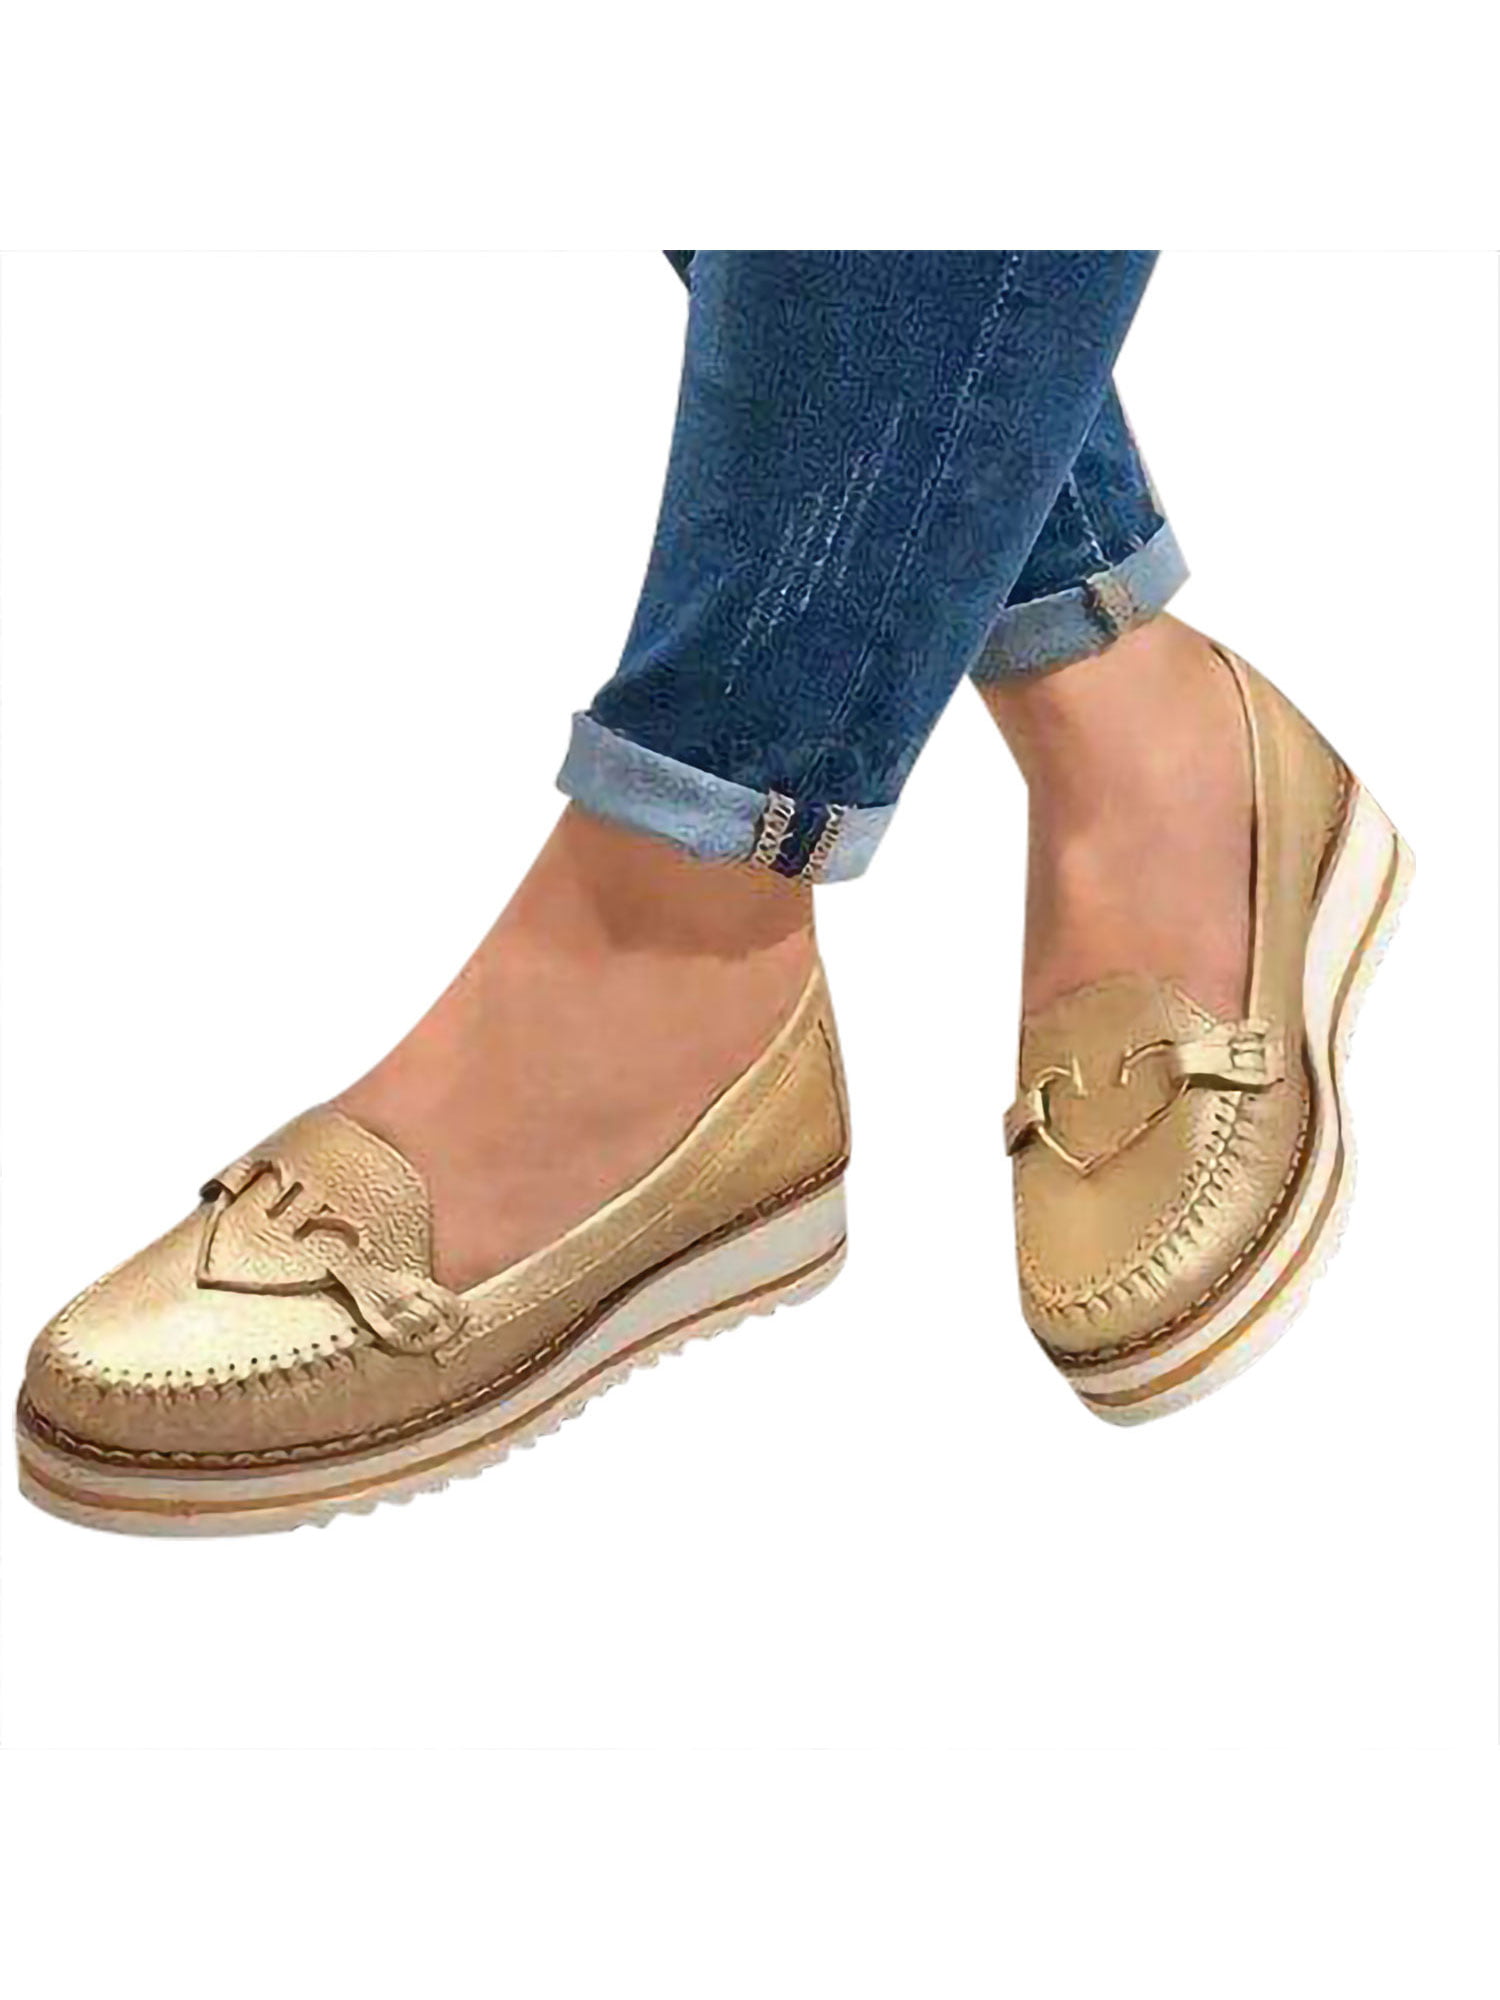 Women Slip On Loafers Leather Casual Ballet Flats Walking Shoes Lightweight Ladies Comfy Work Shoes